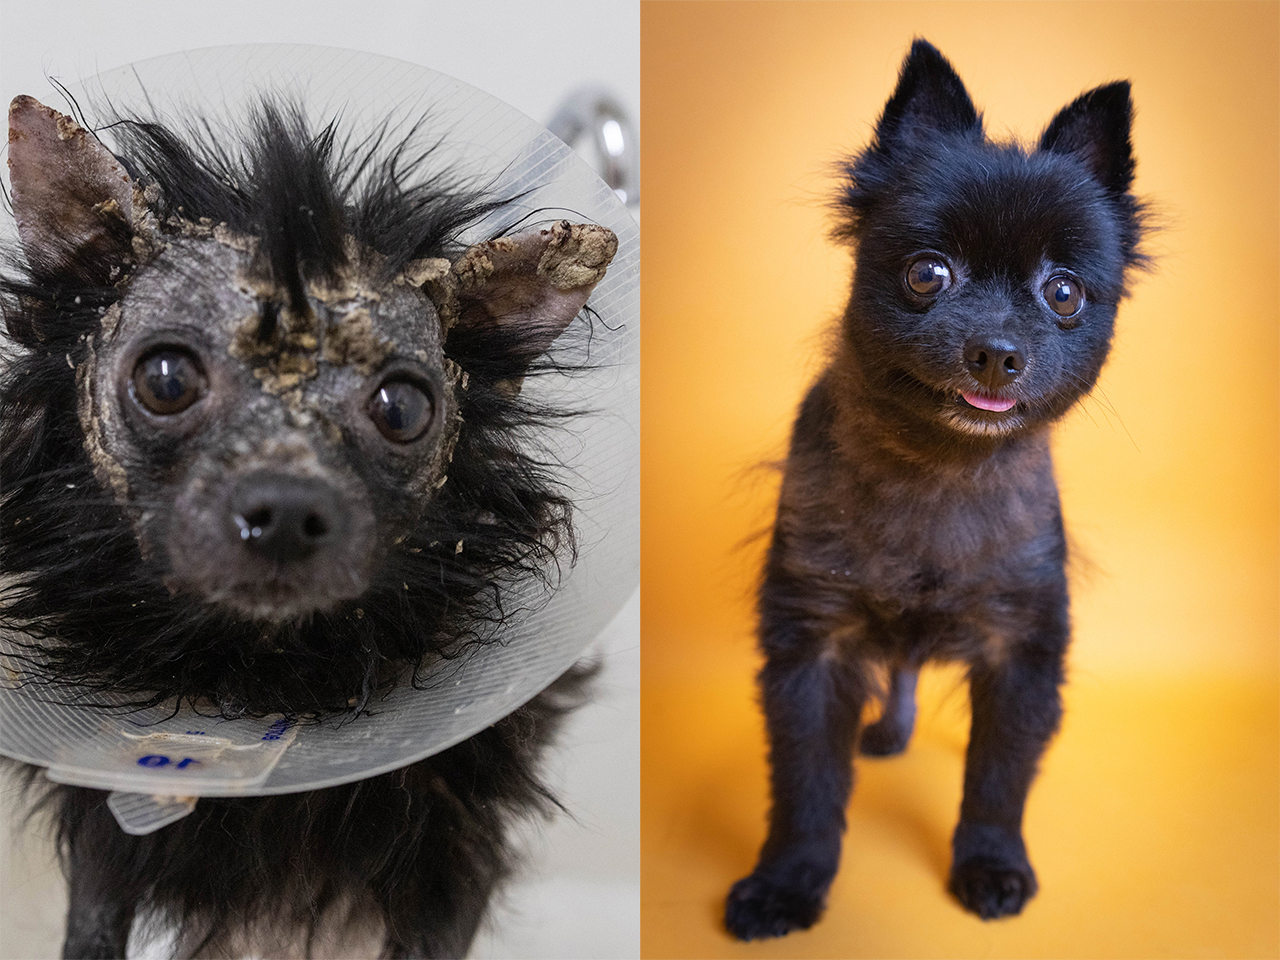 Scar was spotted in a social media post about a severely scabies-infested dog by a Fresno, CA, area shelter staff member. Initially unrecognizable due to his condition, it was determined Scar was a small Pomeranian mix. Rescuers suspect he contracted a disease from previous living conditions, but after receiving medication and baths his rash healed. As his skin health improved, so did his demeanor — today Scar is a completely new dog.